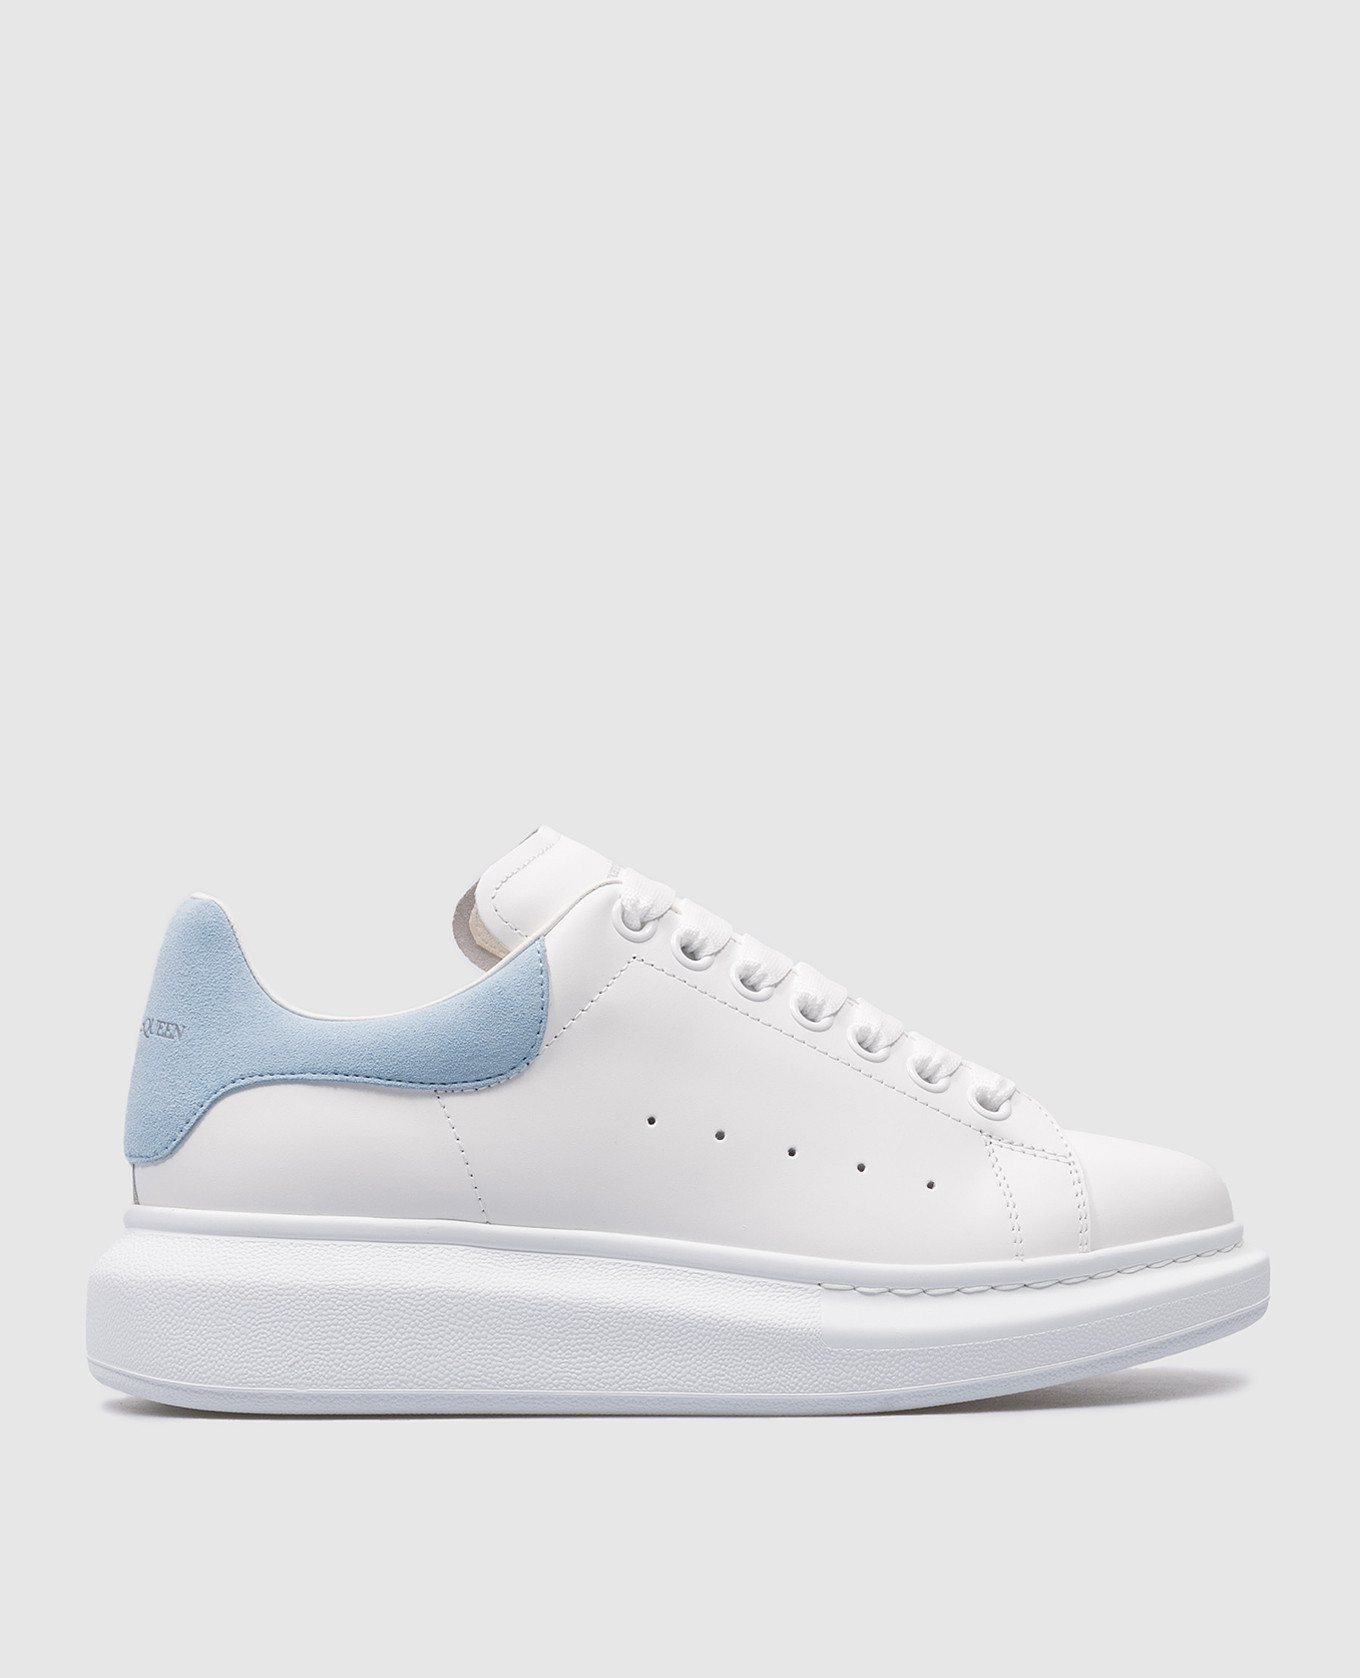 Oversized white leather sneakers with logo